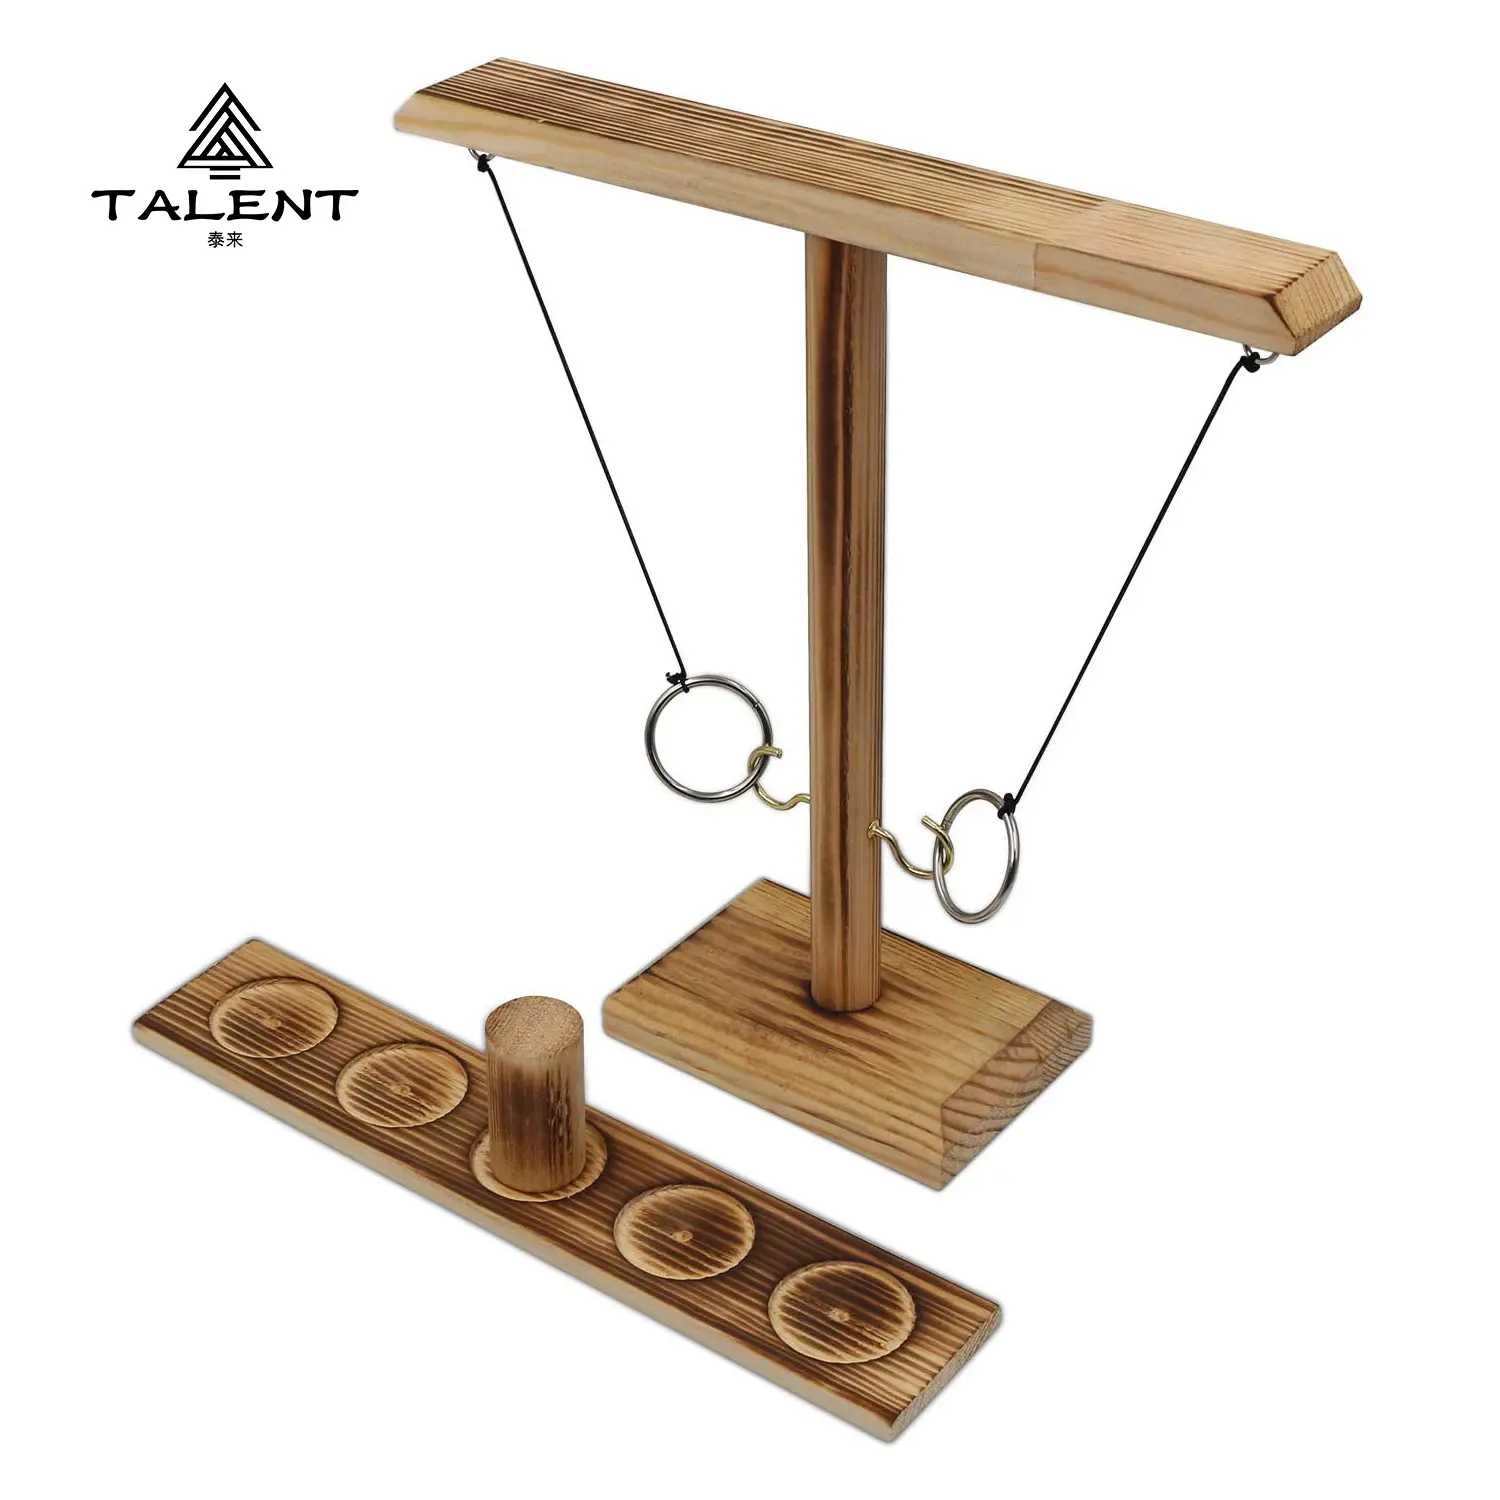 Tailai Ring Toss Game Ring Toss with Shot Ladder Fun Hook and Ring Game Handmade Wooden Interactive Game for Home Party